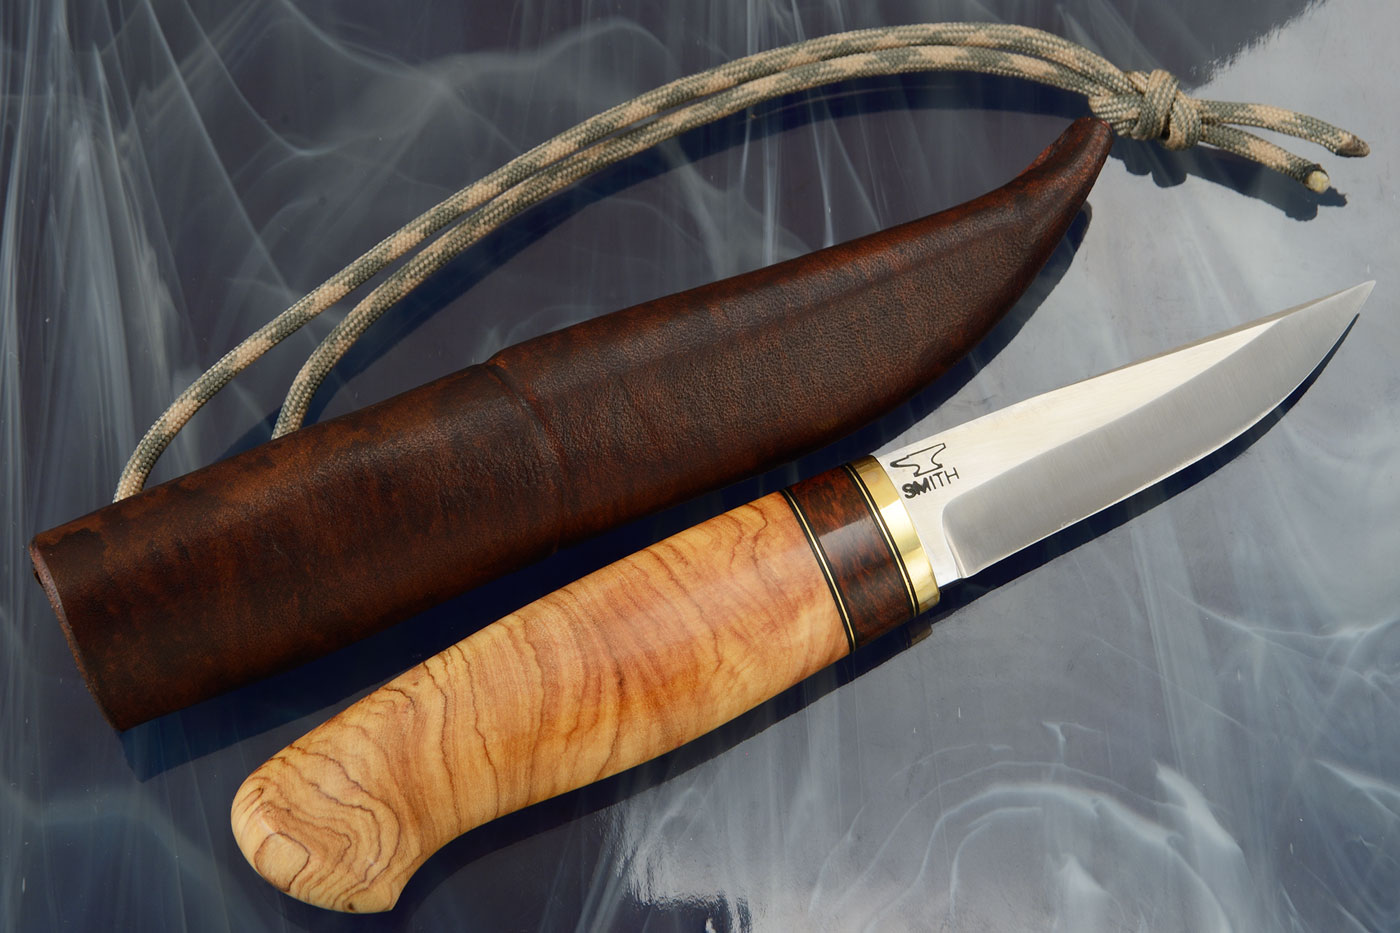 Puukko with Wild Olive and Snakewood